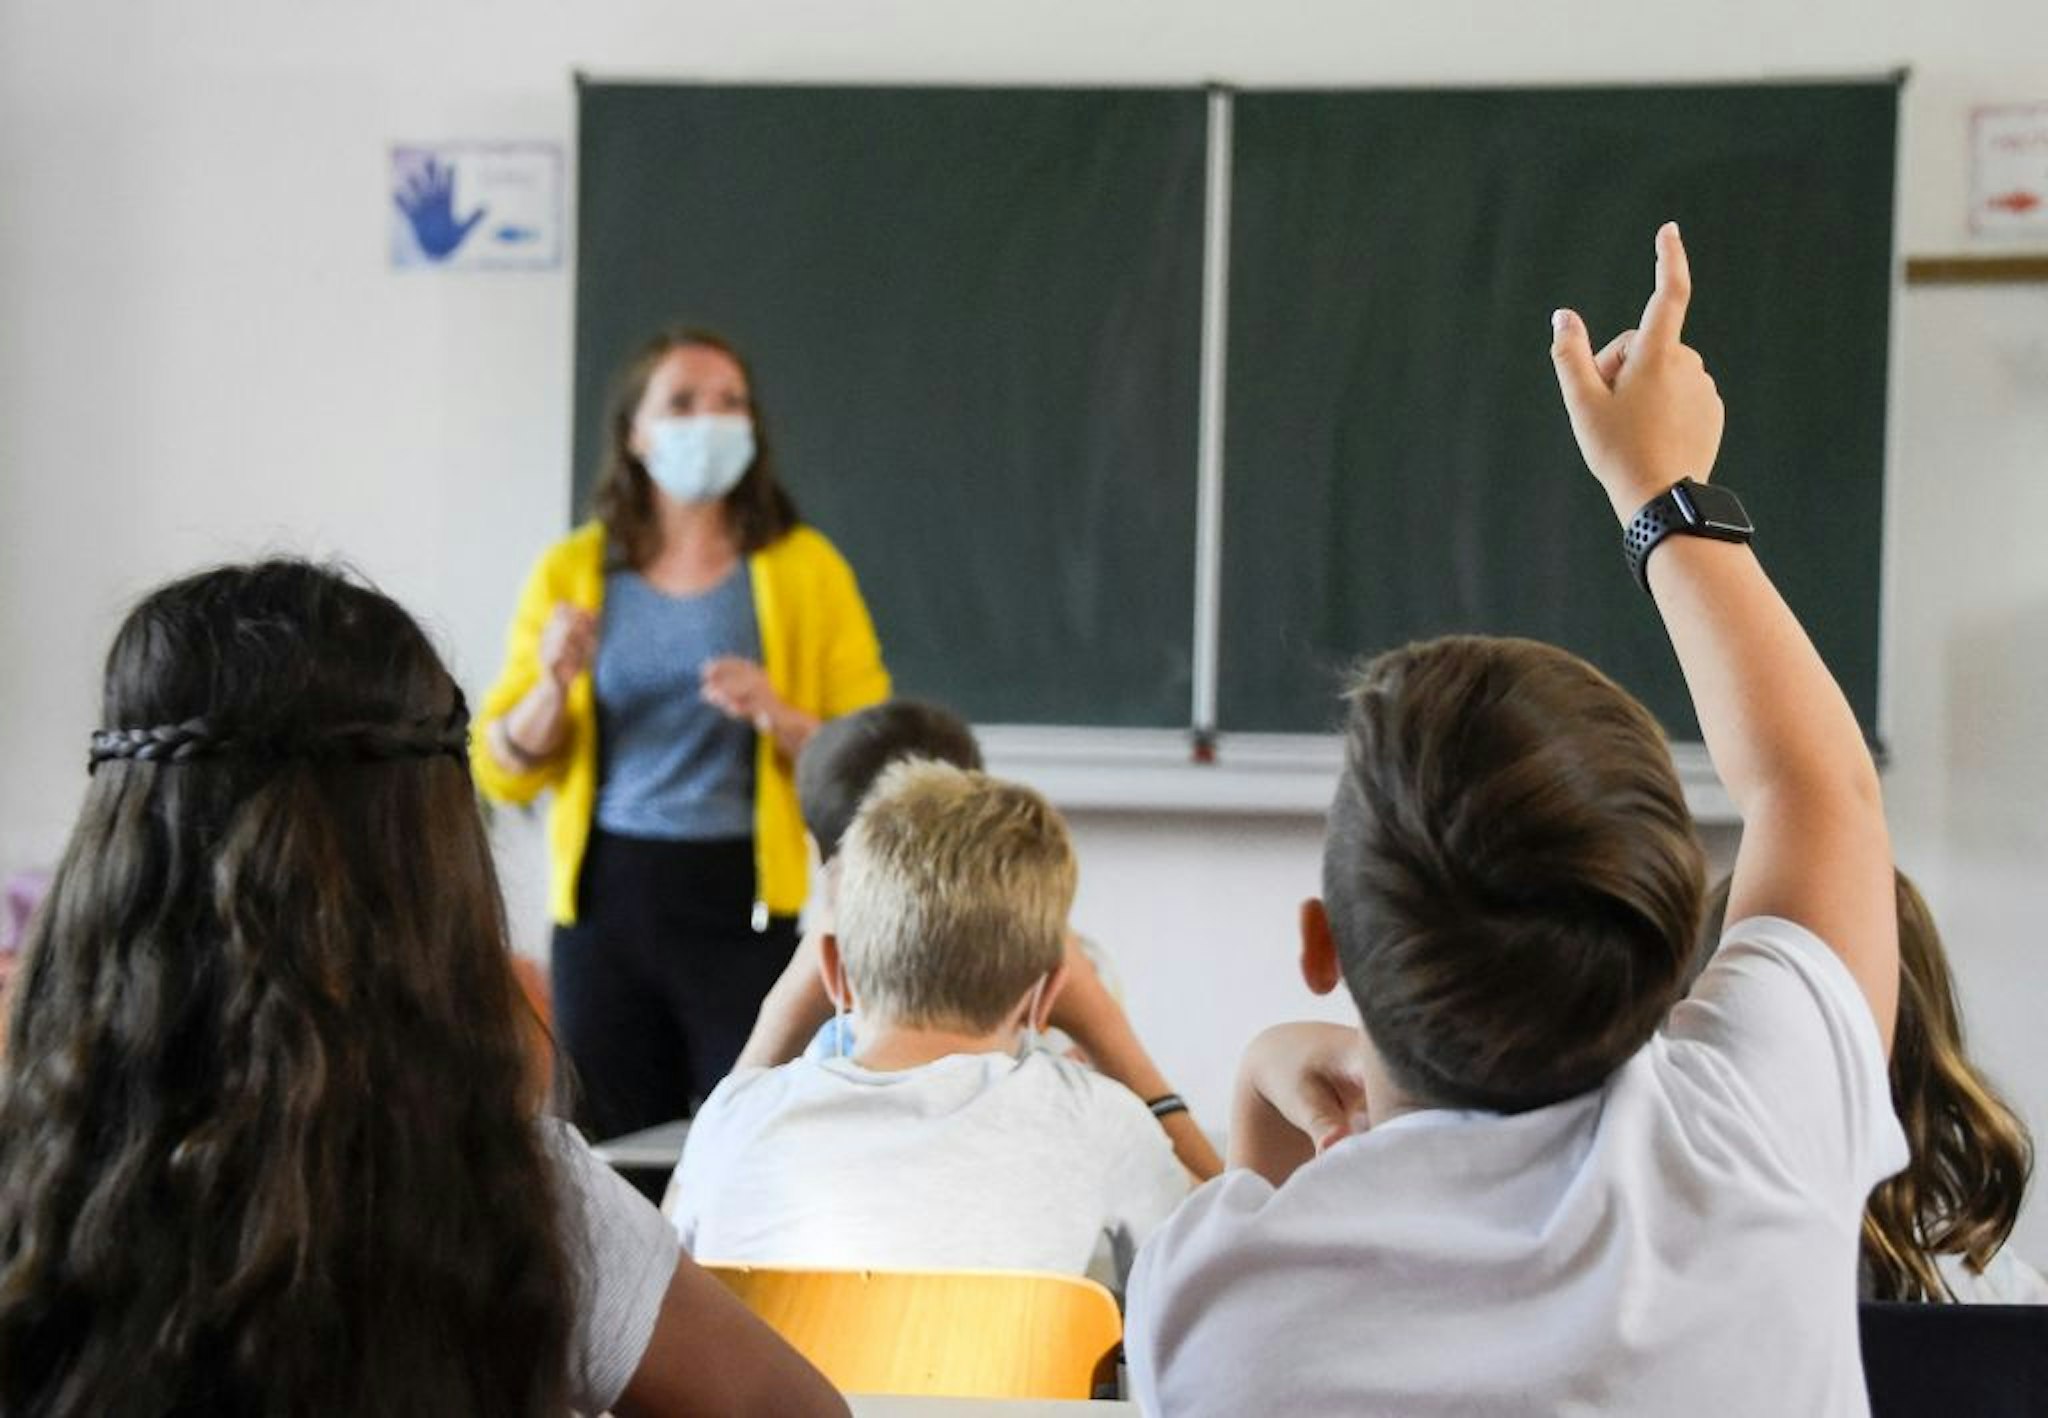 Pupils attend a lesson at their elementary school in Berlin on August 9, 2021, after coming back from summer holidays and amid the coronavirus COVID-19 pandemic.. - Berlin's pupils are to wear face masks during the first two weeks after the summerholidays in order to prevent the spreading of the coronavirus. (Photo by Tobias SCHWARZ / AFP) (Photo by TOBIAS SCHWARZ/AFP via Getty Images)